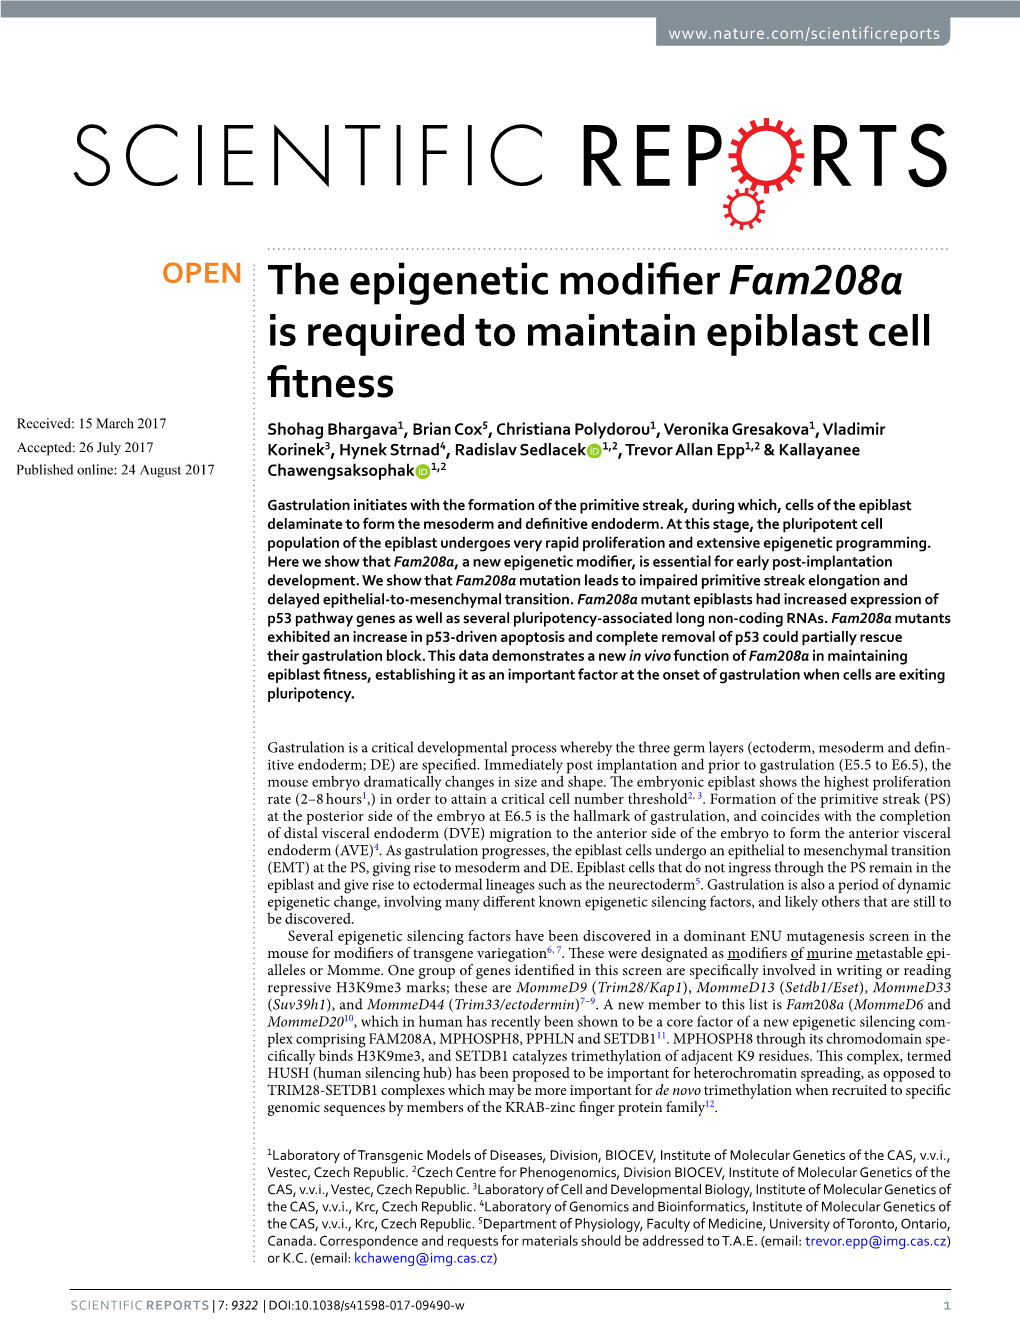 The Epigenetic Modifier Fam208a Is Required to Maintain Epiblast Cell